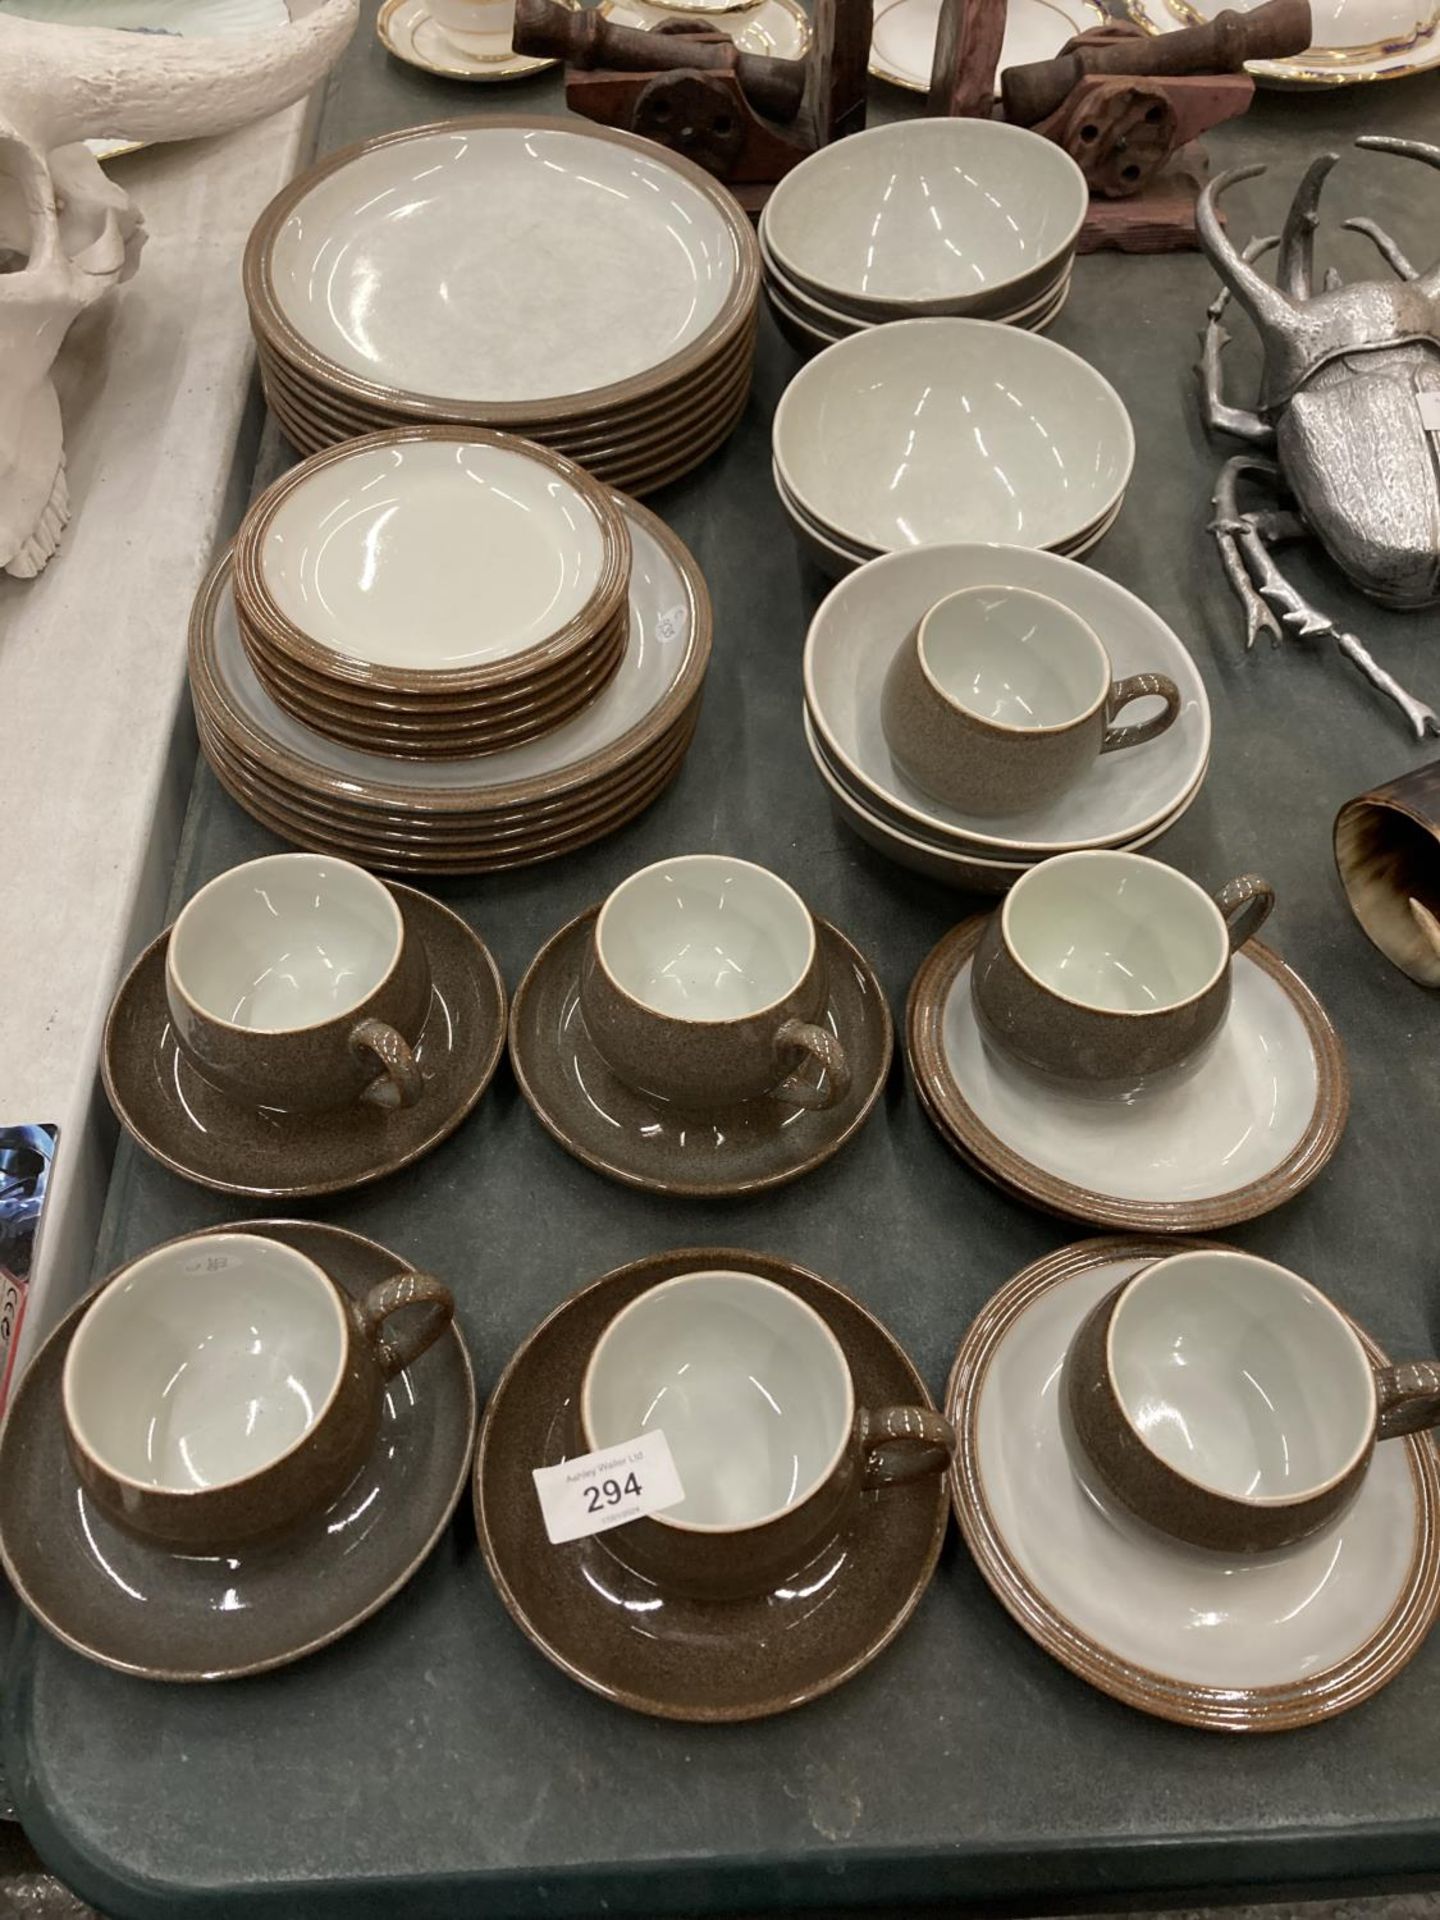 A PART DENBY DINNER SERVICE TO INCLUDE DINNER AND SIDE PLATES, BOWLS, CUPS AND SAUCERS - 33 PIECES